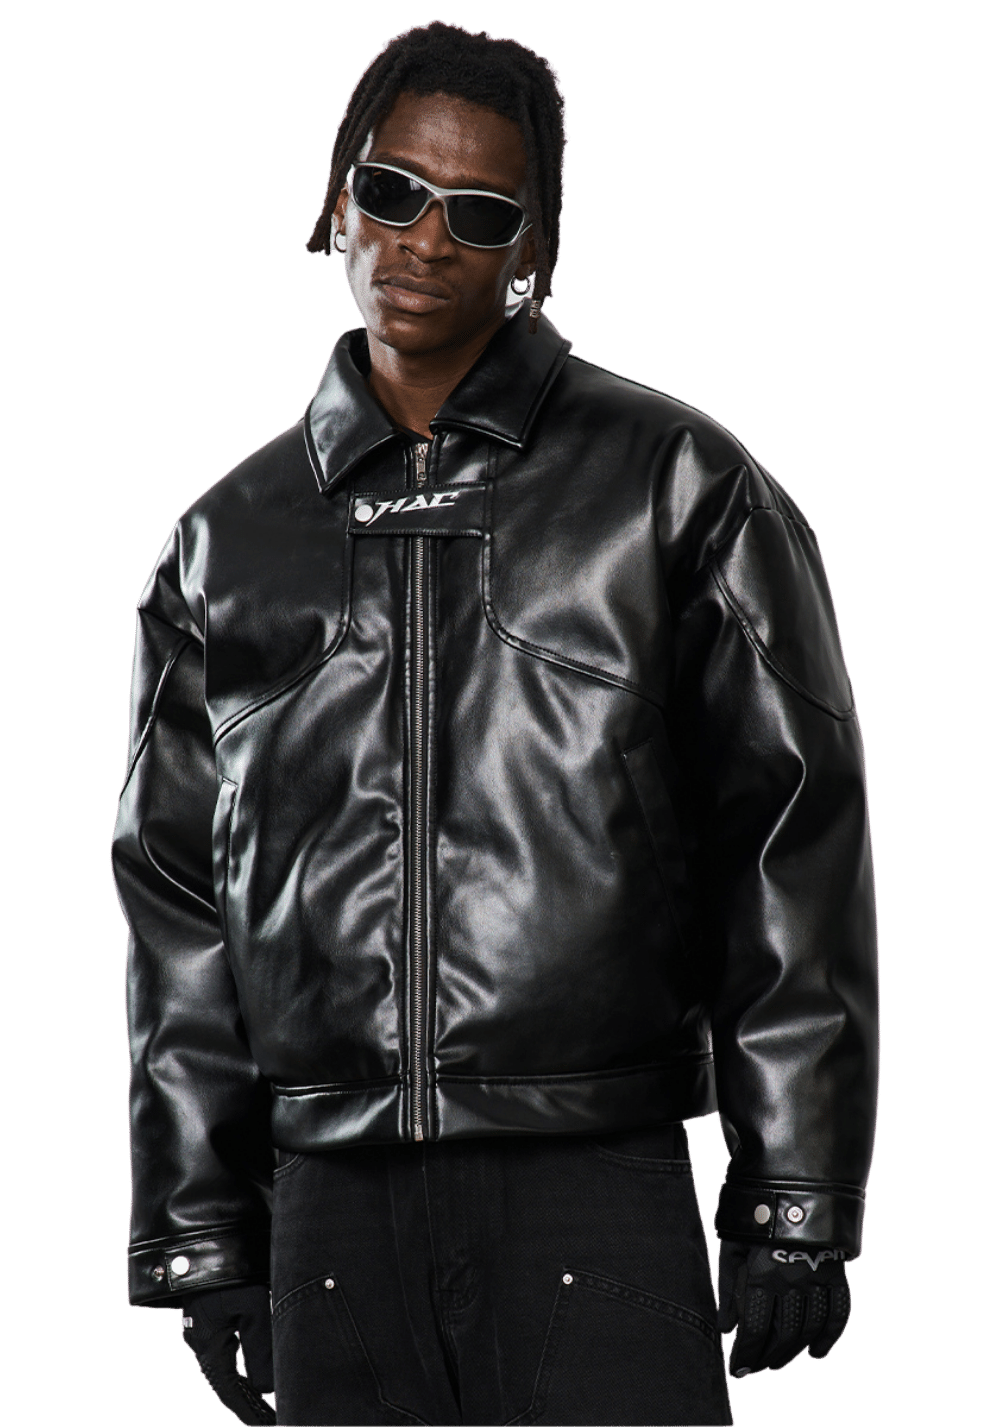 Embroidered Racing Leather Jacket - PSYLOS 1, Embroidered Racing Leather Jacket, Jacket, HARSH AND CRUEL, PSYLOS 1